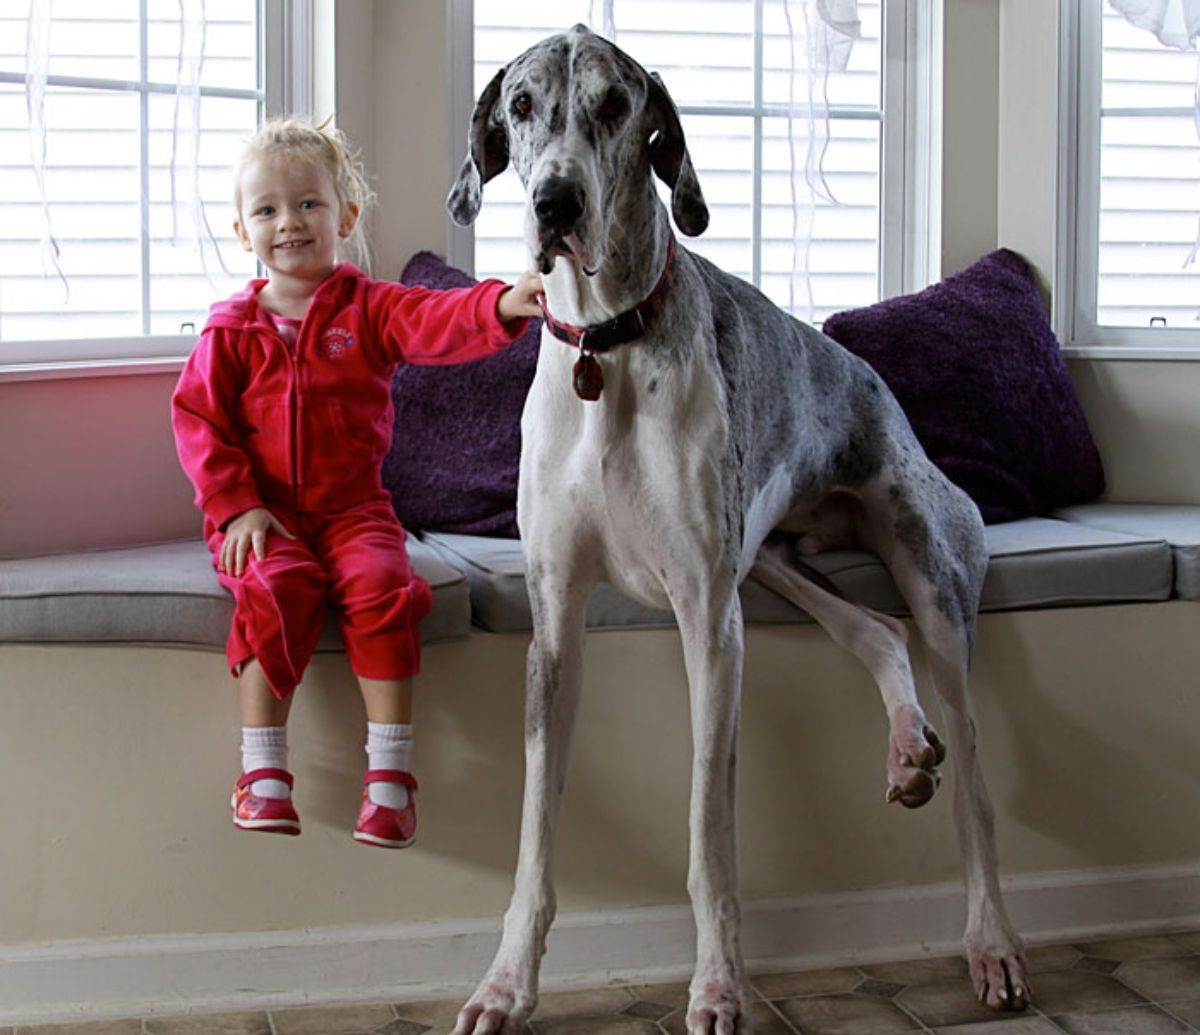 little girl sitting on a windowseat next to a white and black great dane who is sitting on the seat with the front legs on the floor